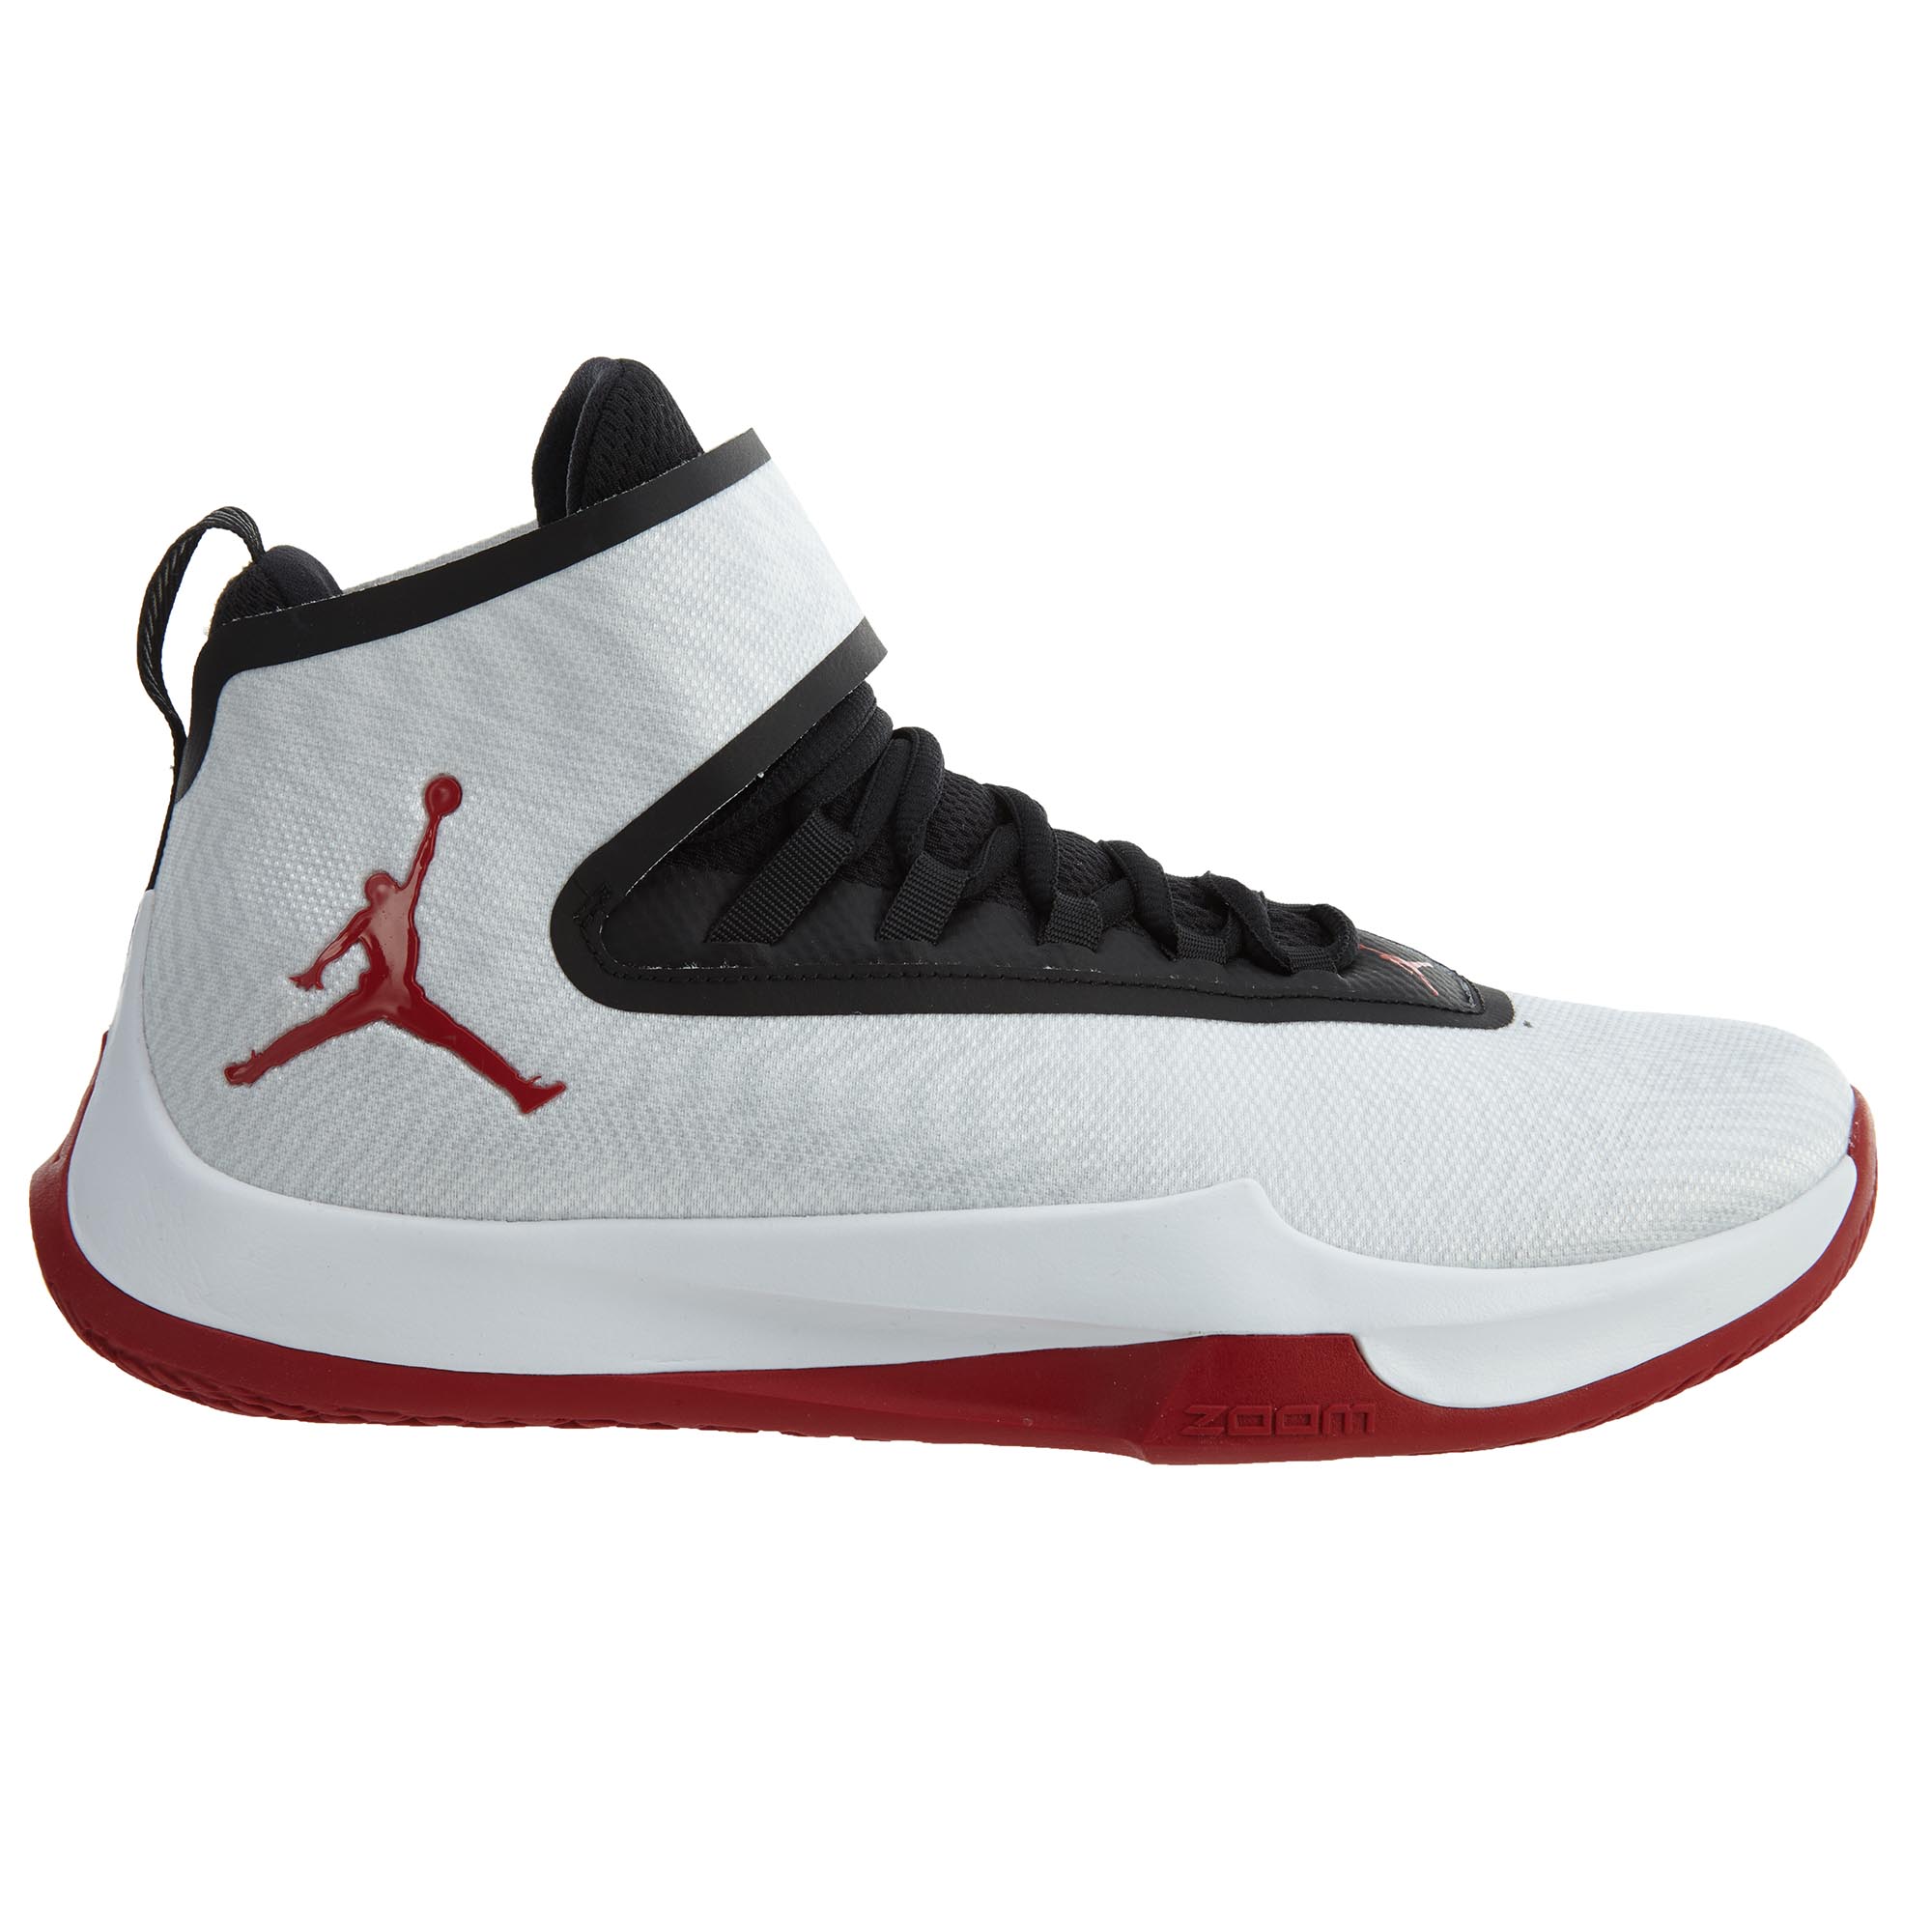 Jordan Fly Unlimited White/Gym Red 